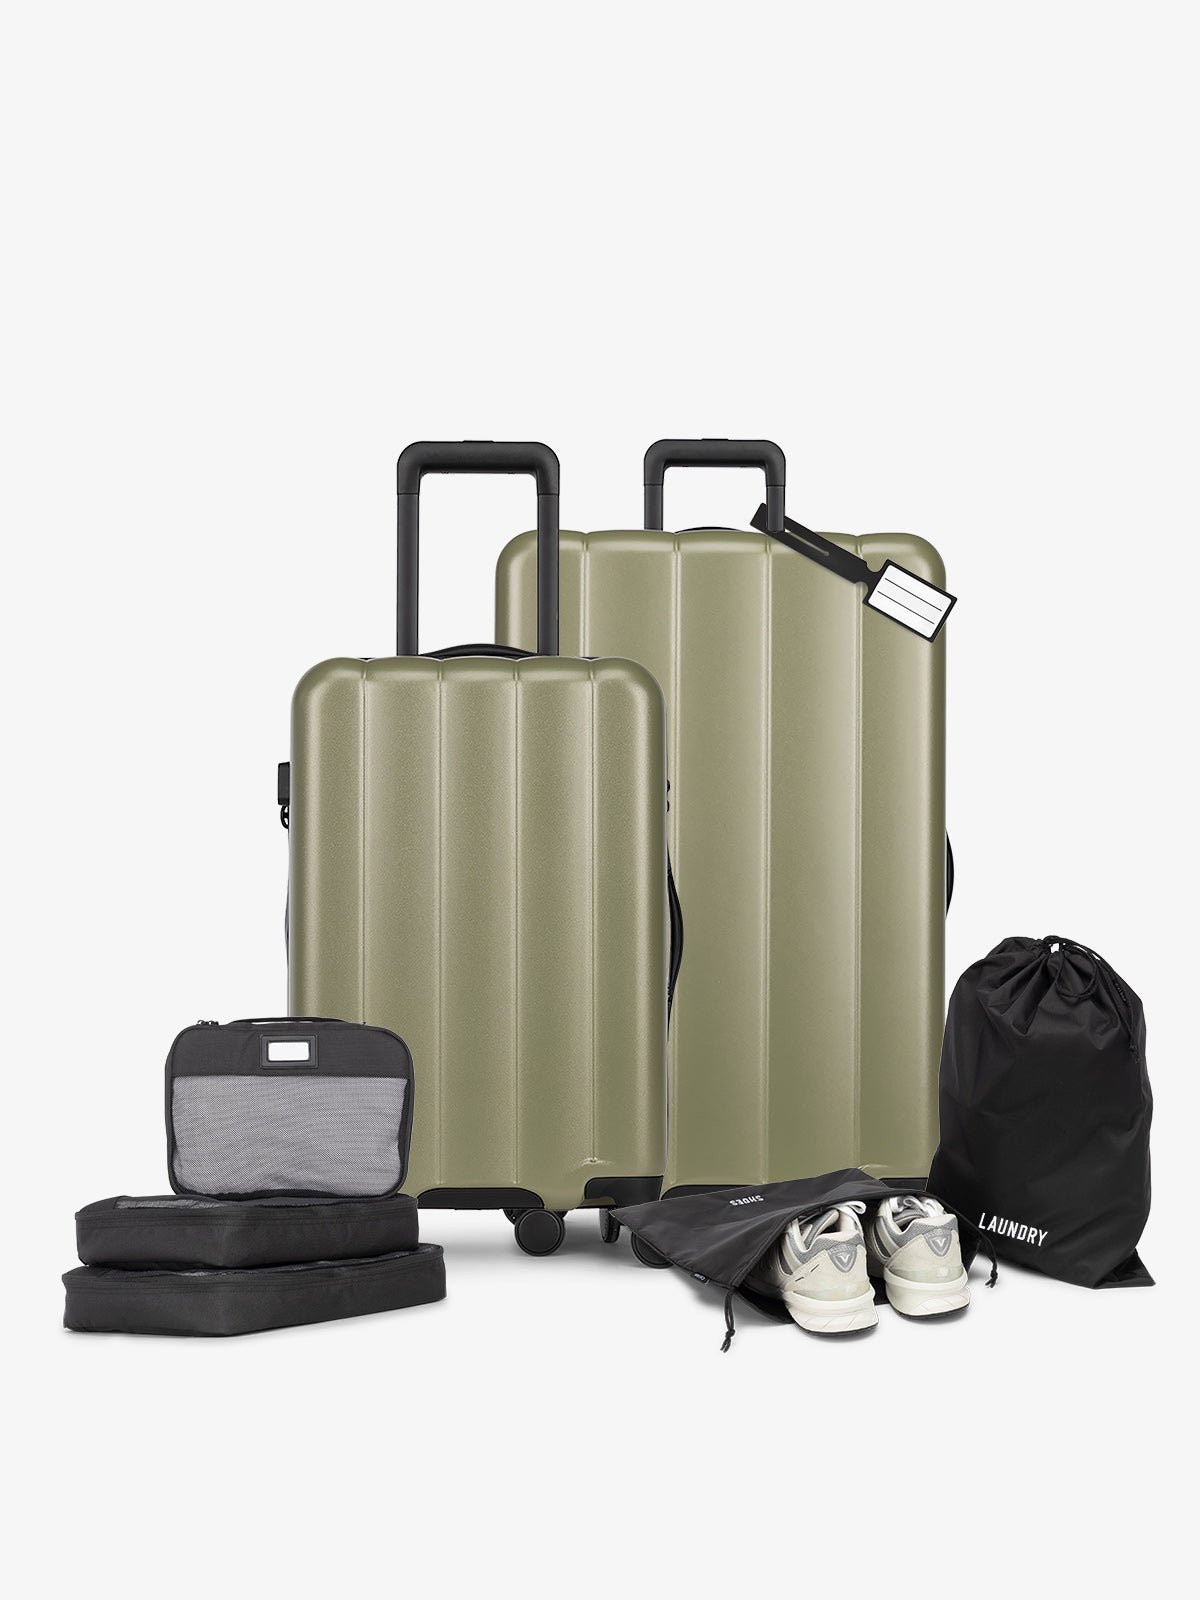 CALPAK Starter Luggage Set with Carry-On, Large Luggage, Packing Cubes, Pouches and Luggage tag in green